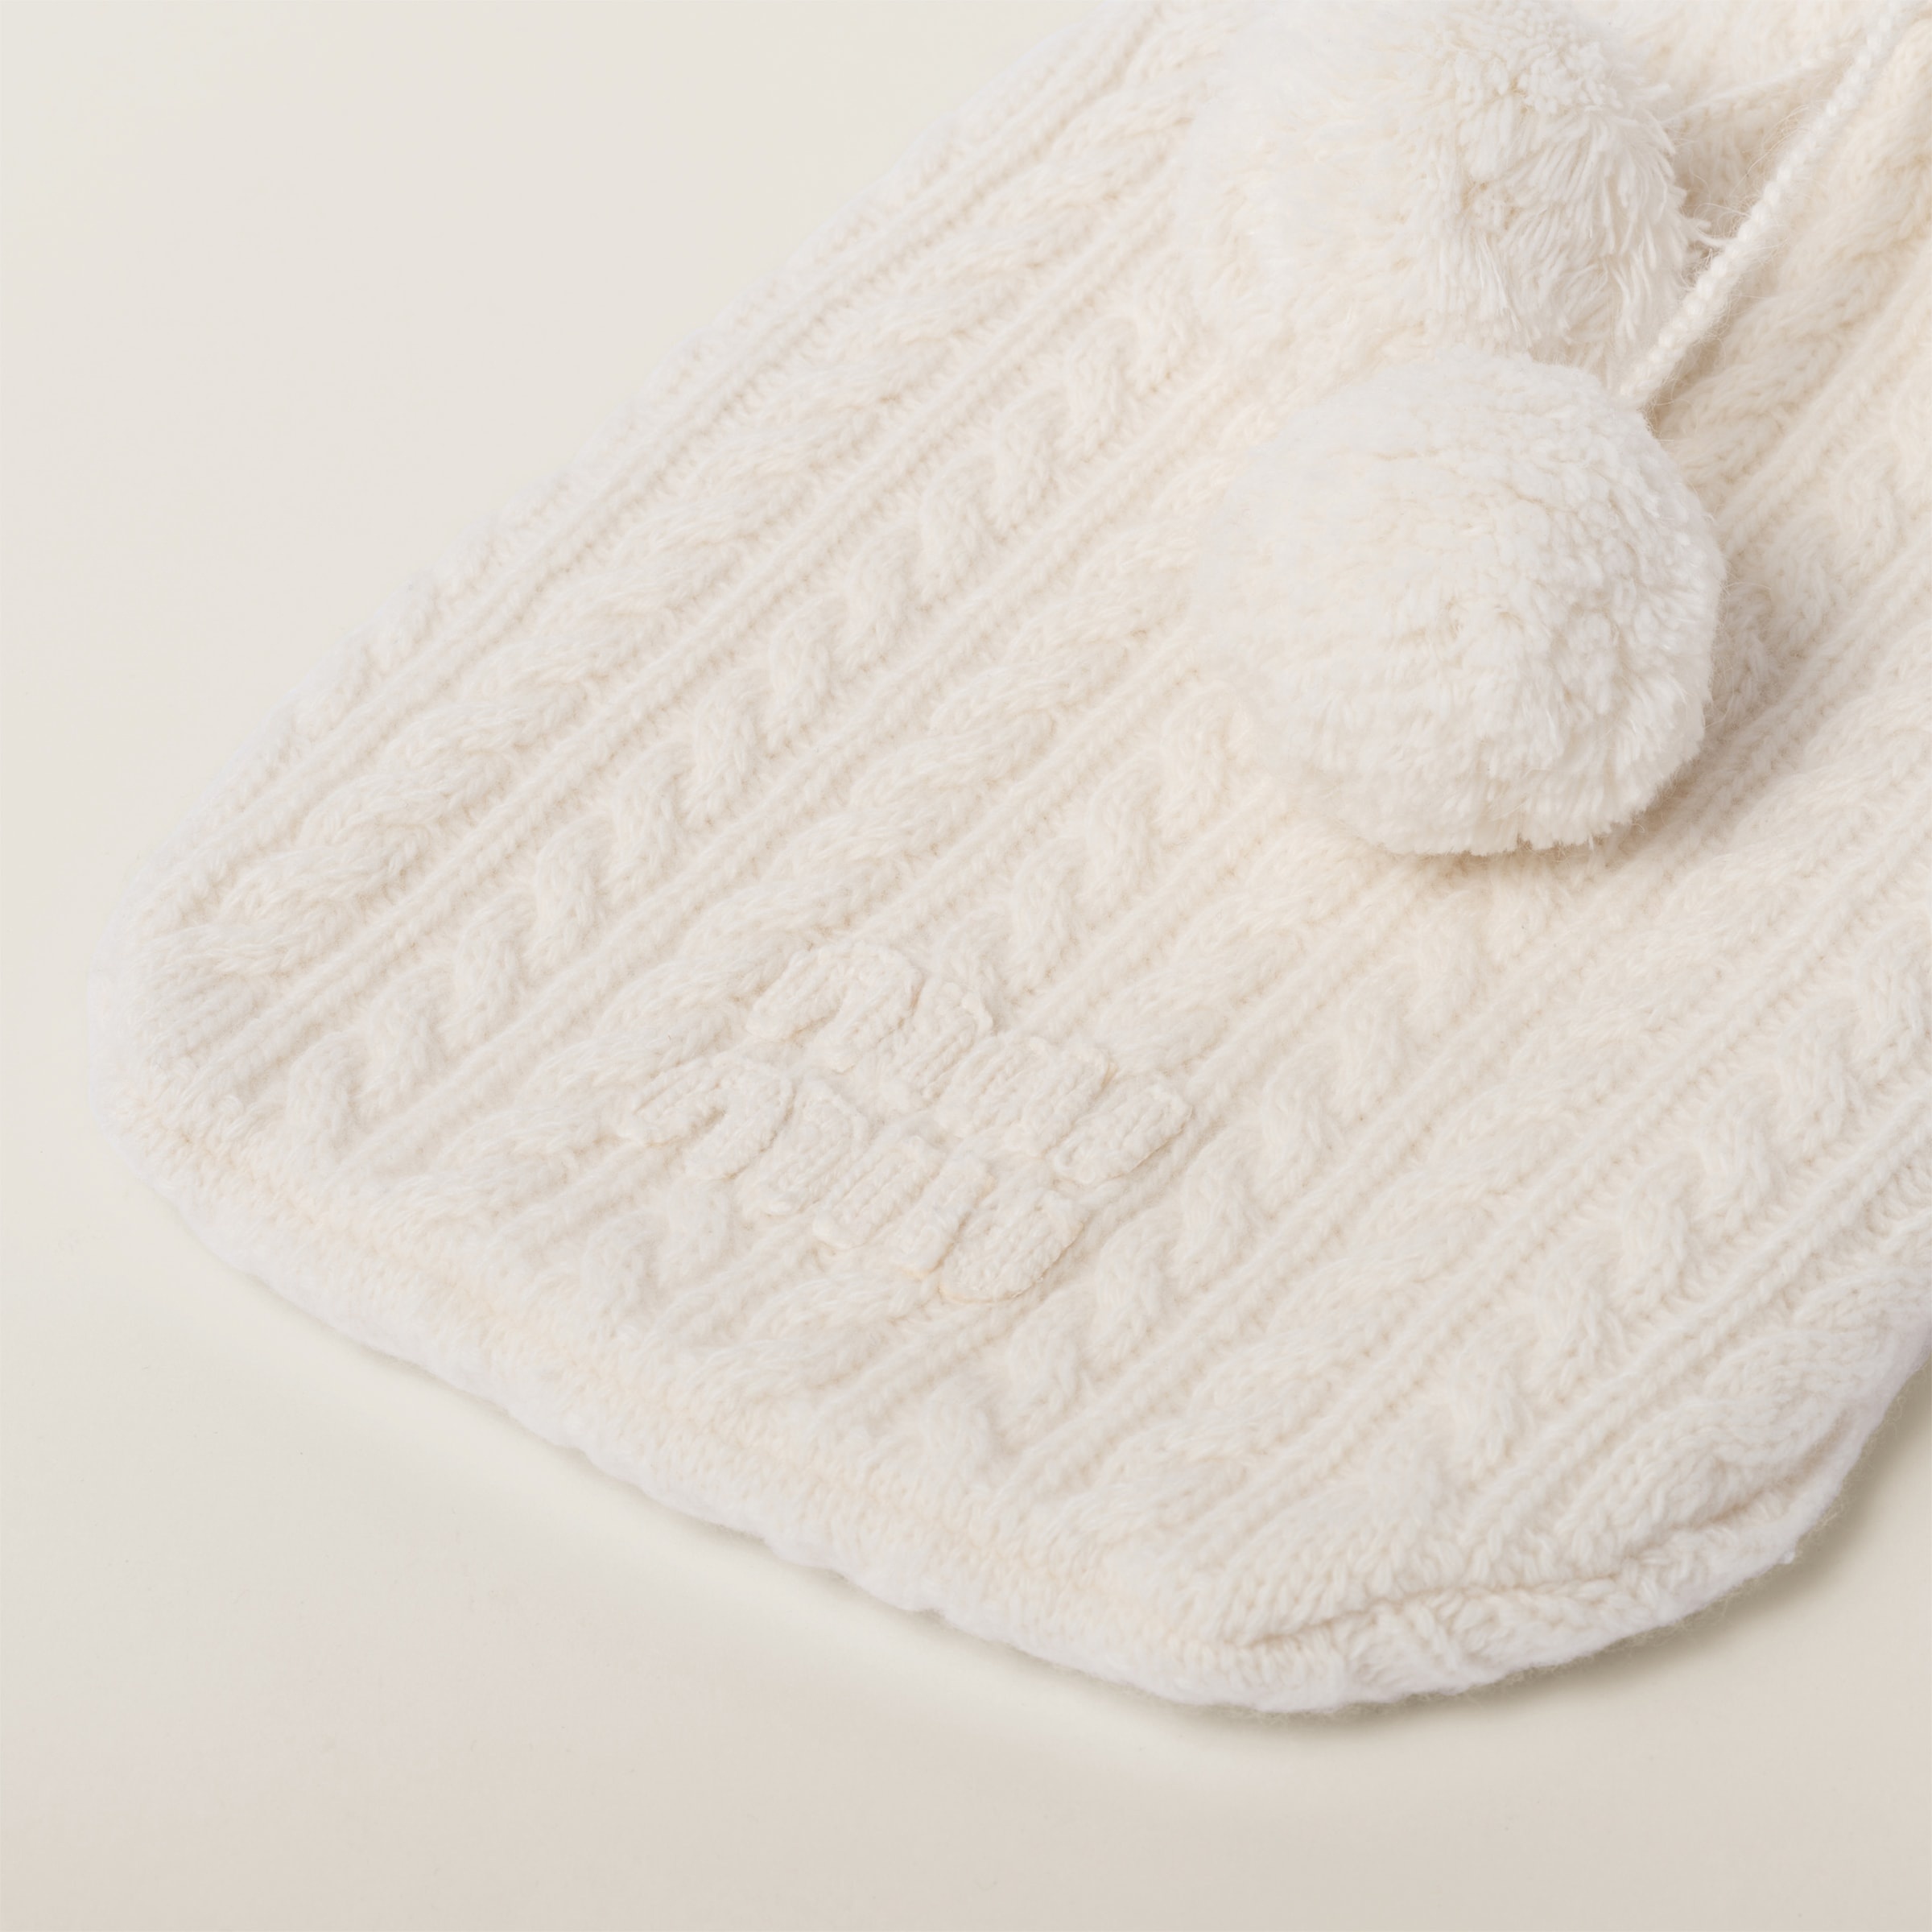 Hot water bottle with wool and cashmere cover - 2